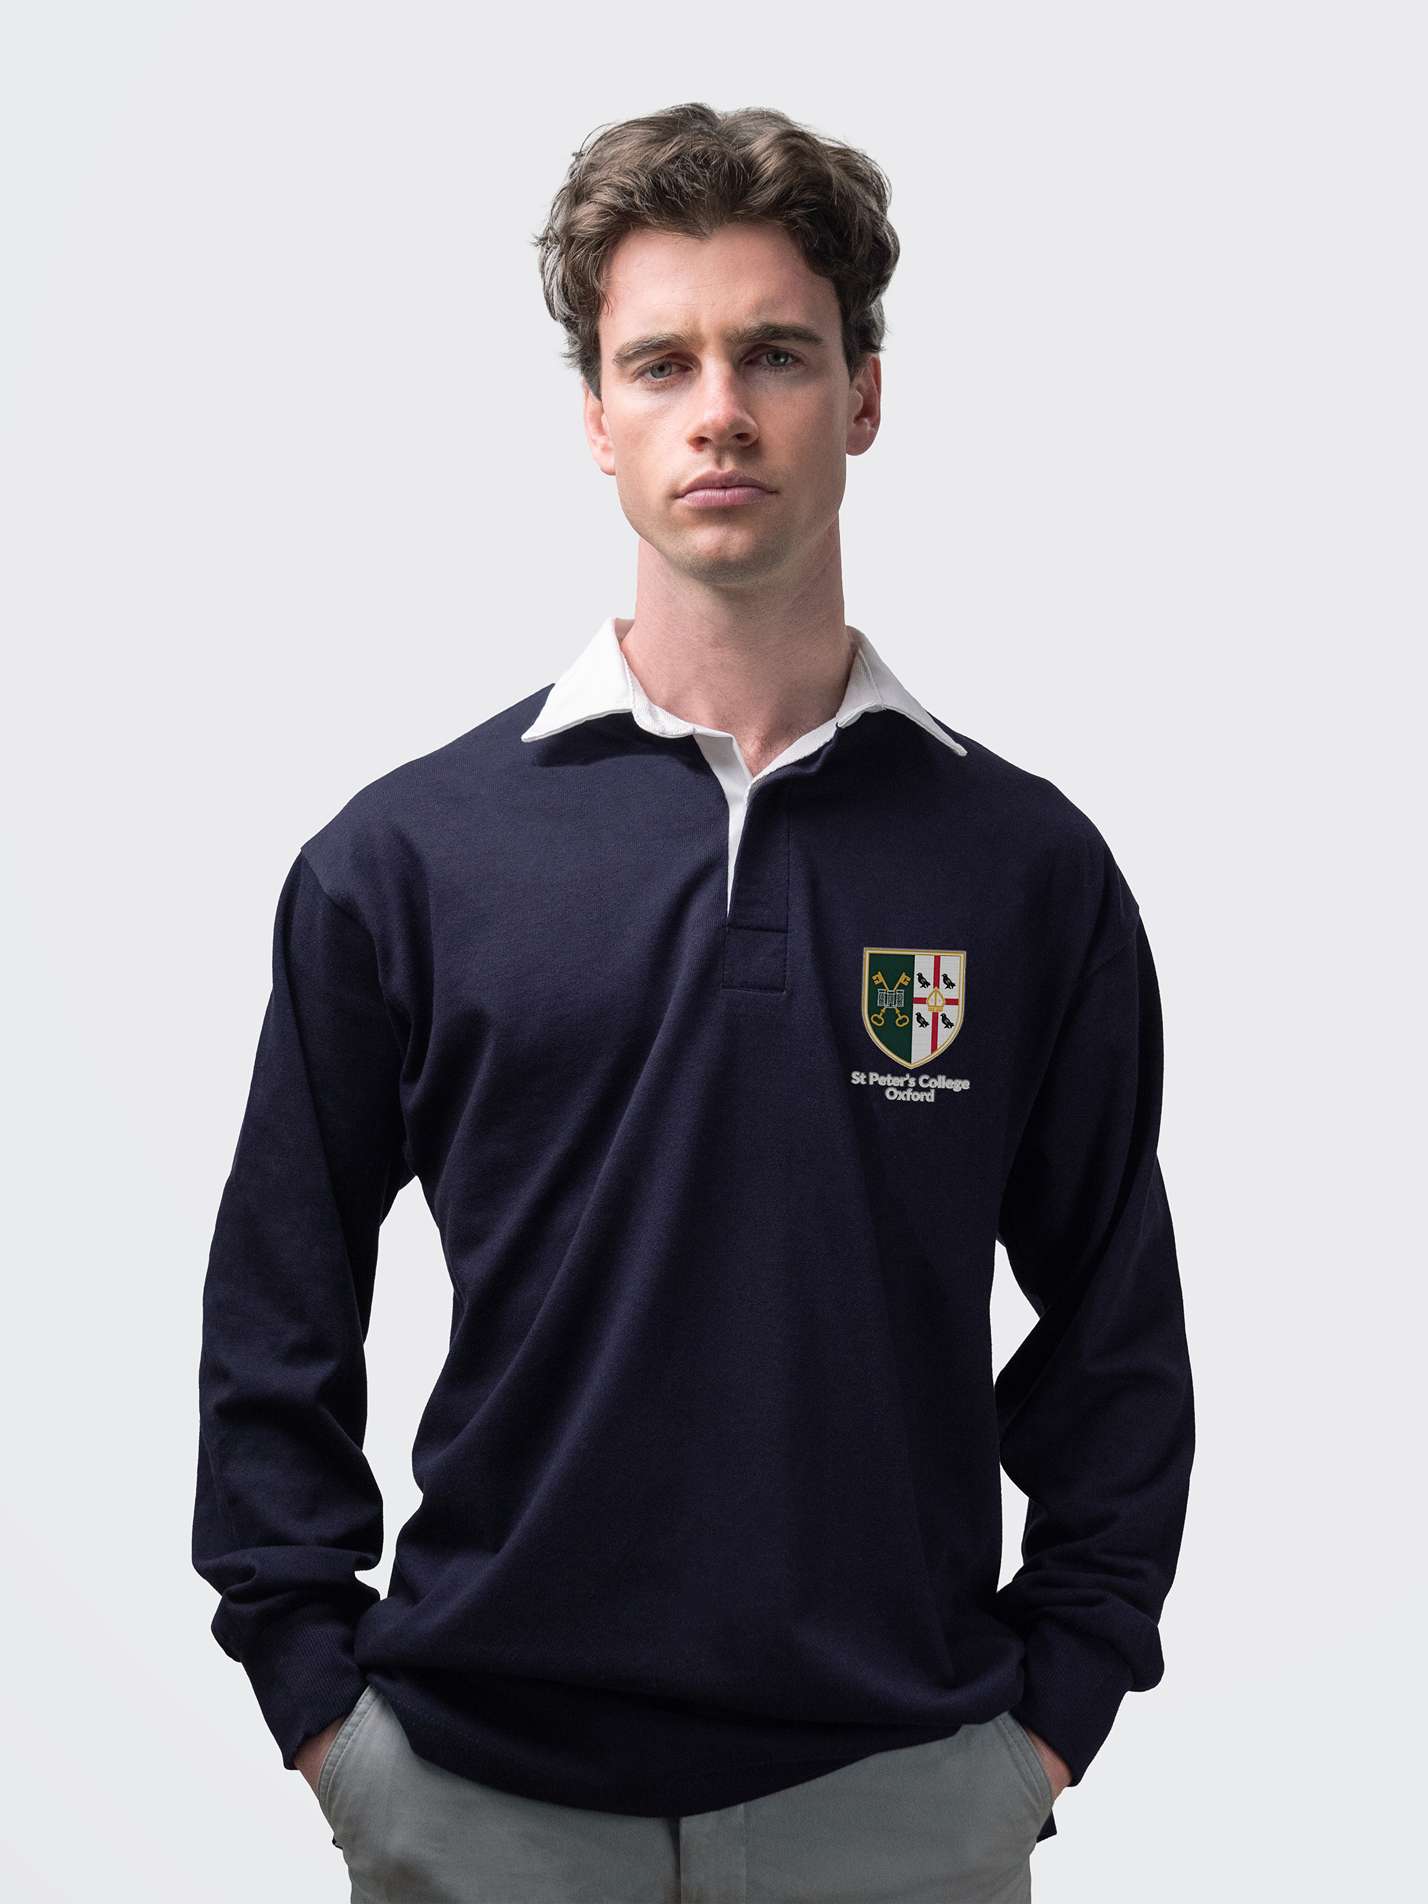 St Peter's student wearing an embroidered mens rugby shirt in navy